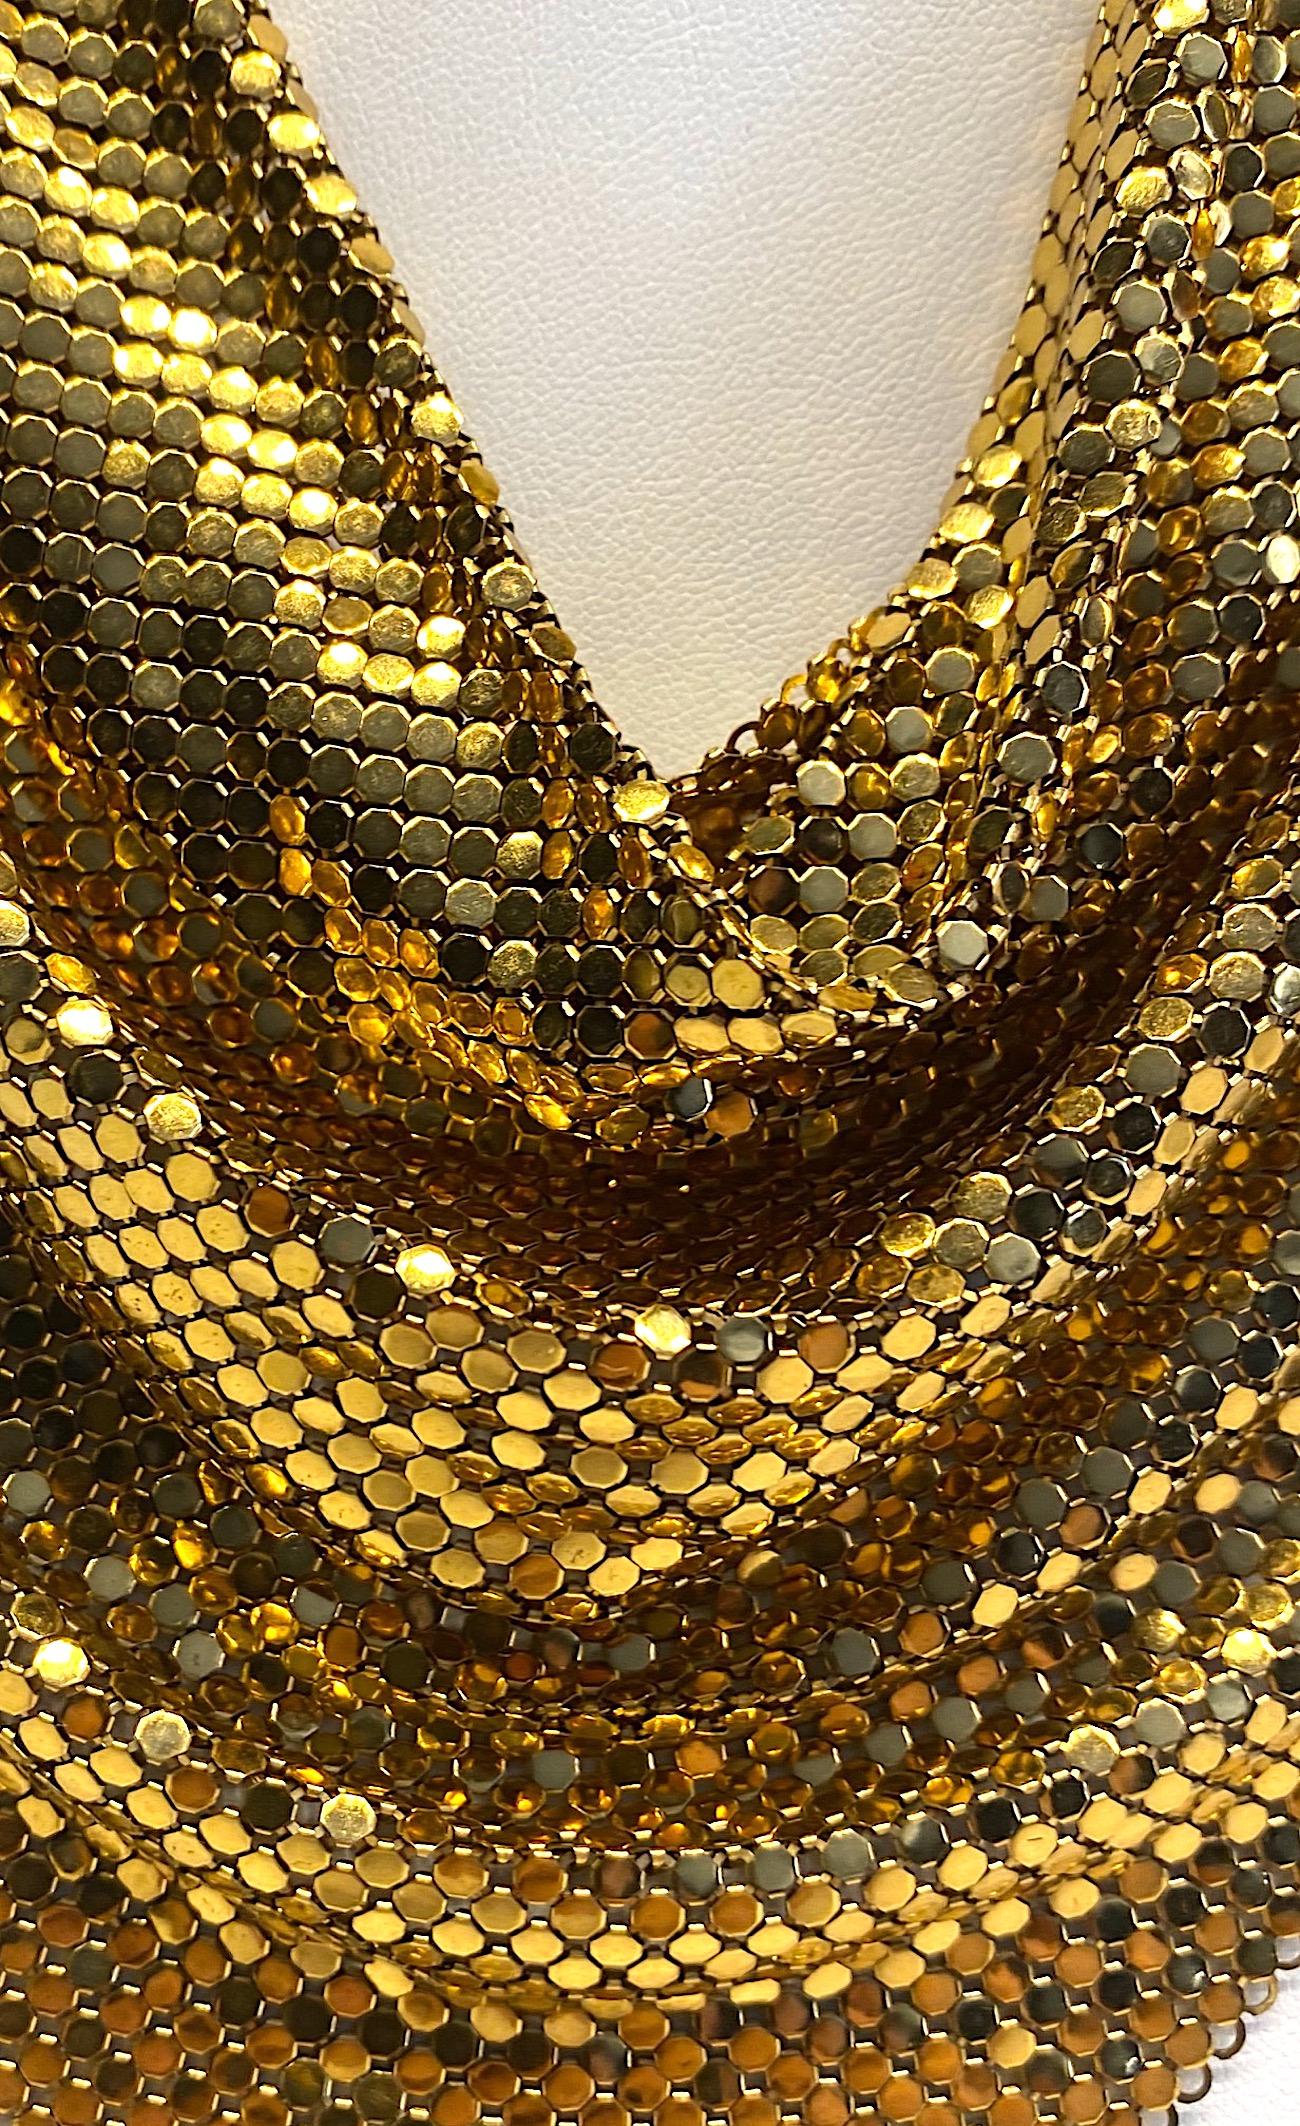 Perfect for twirling the night away at the disco. Whiting & Davis gold mesh handkerchief necklaces was often seen adorning the necks of celebrities at Studio 54 and chic parties in LA. The necklace has a rich gold patina in perfect condition. It is